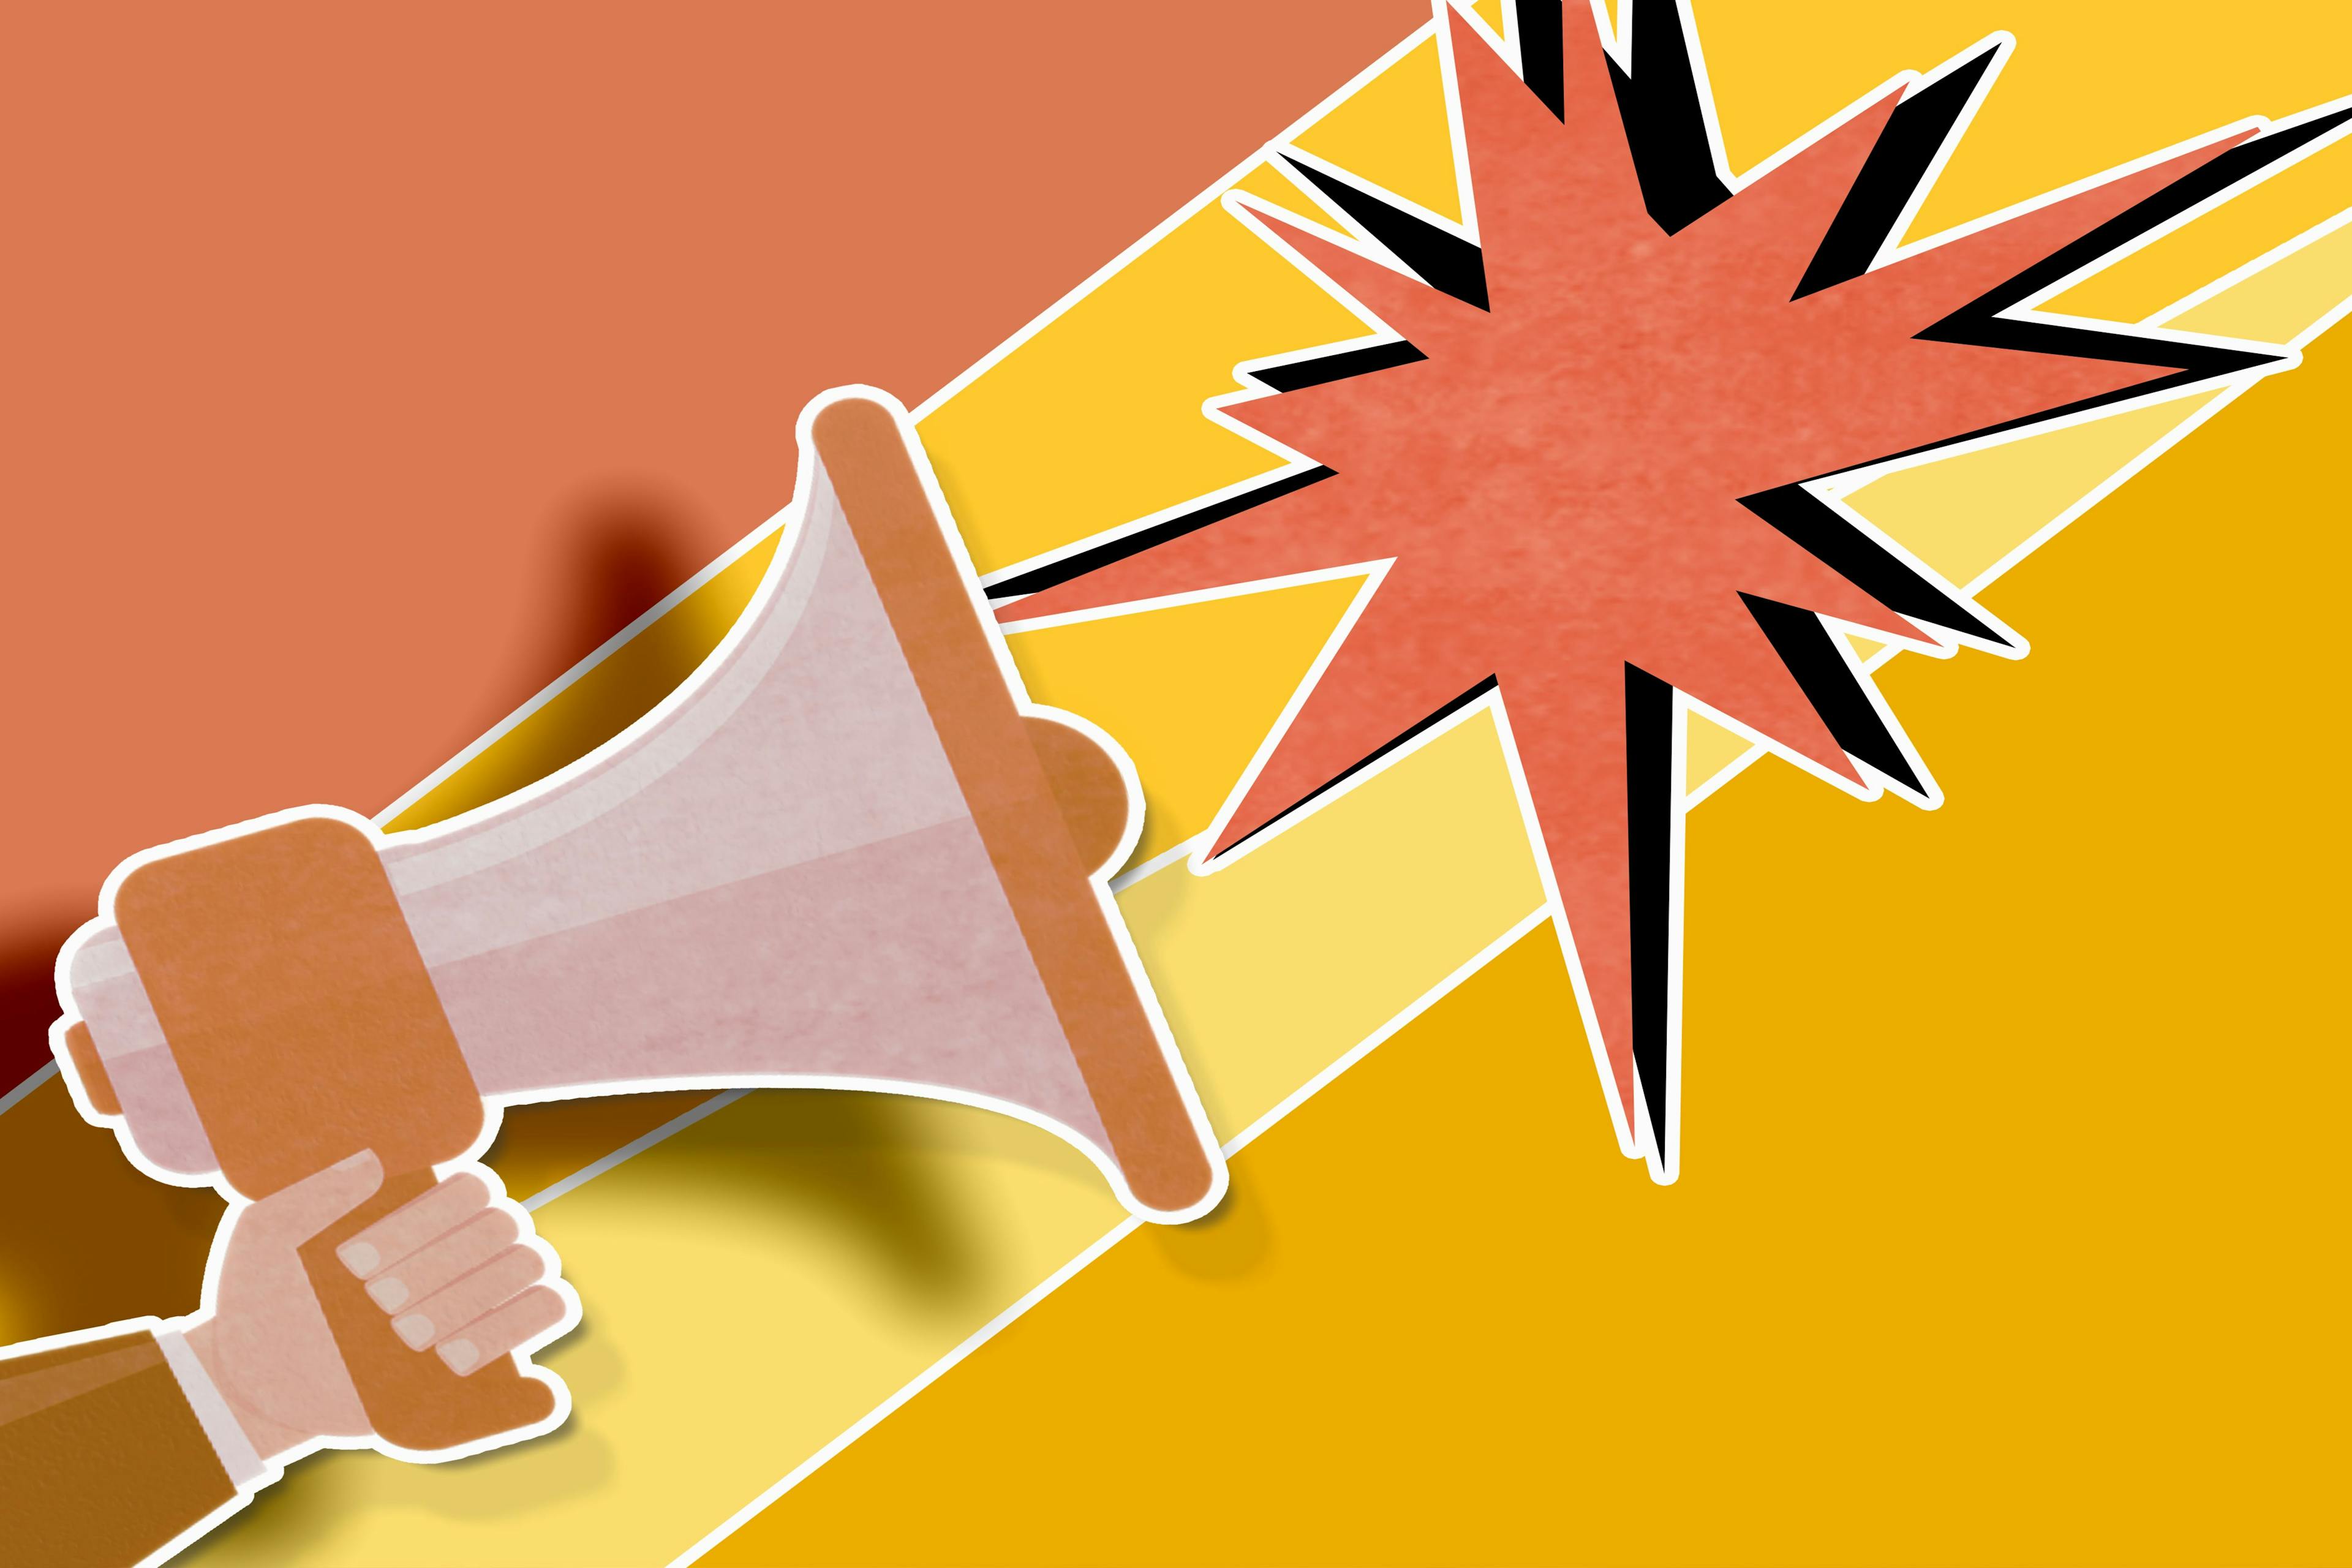 a graphic of a megaphone with a speech bubble coming out of it